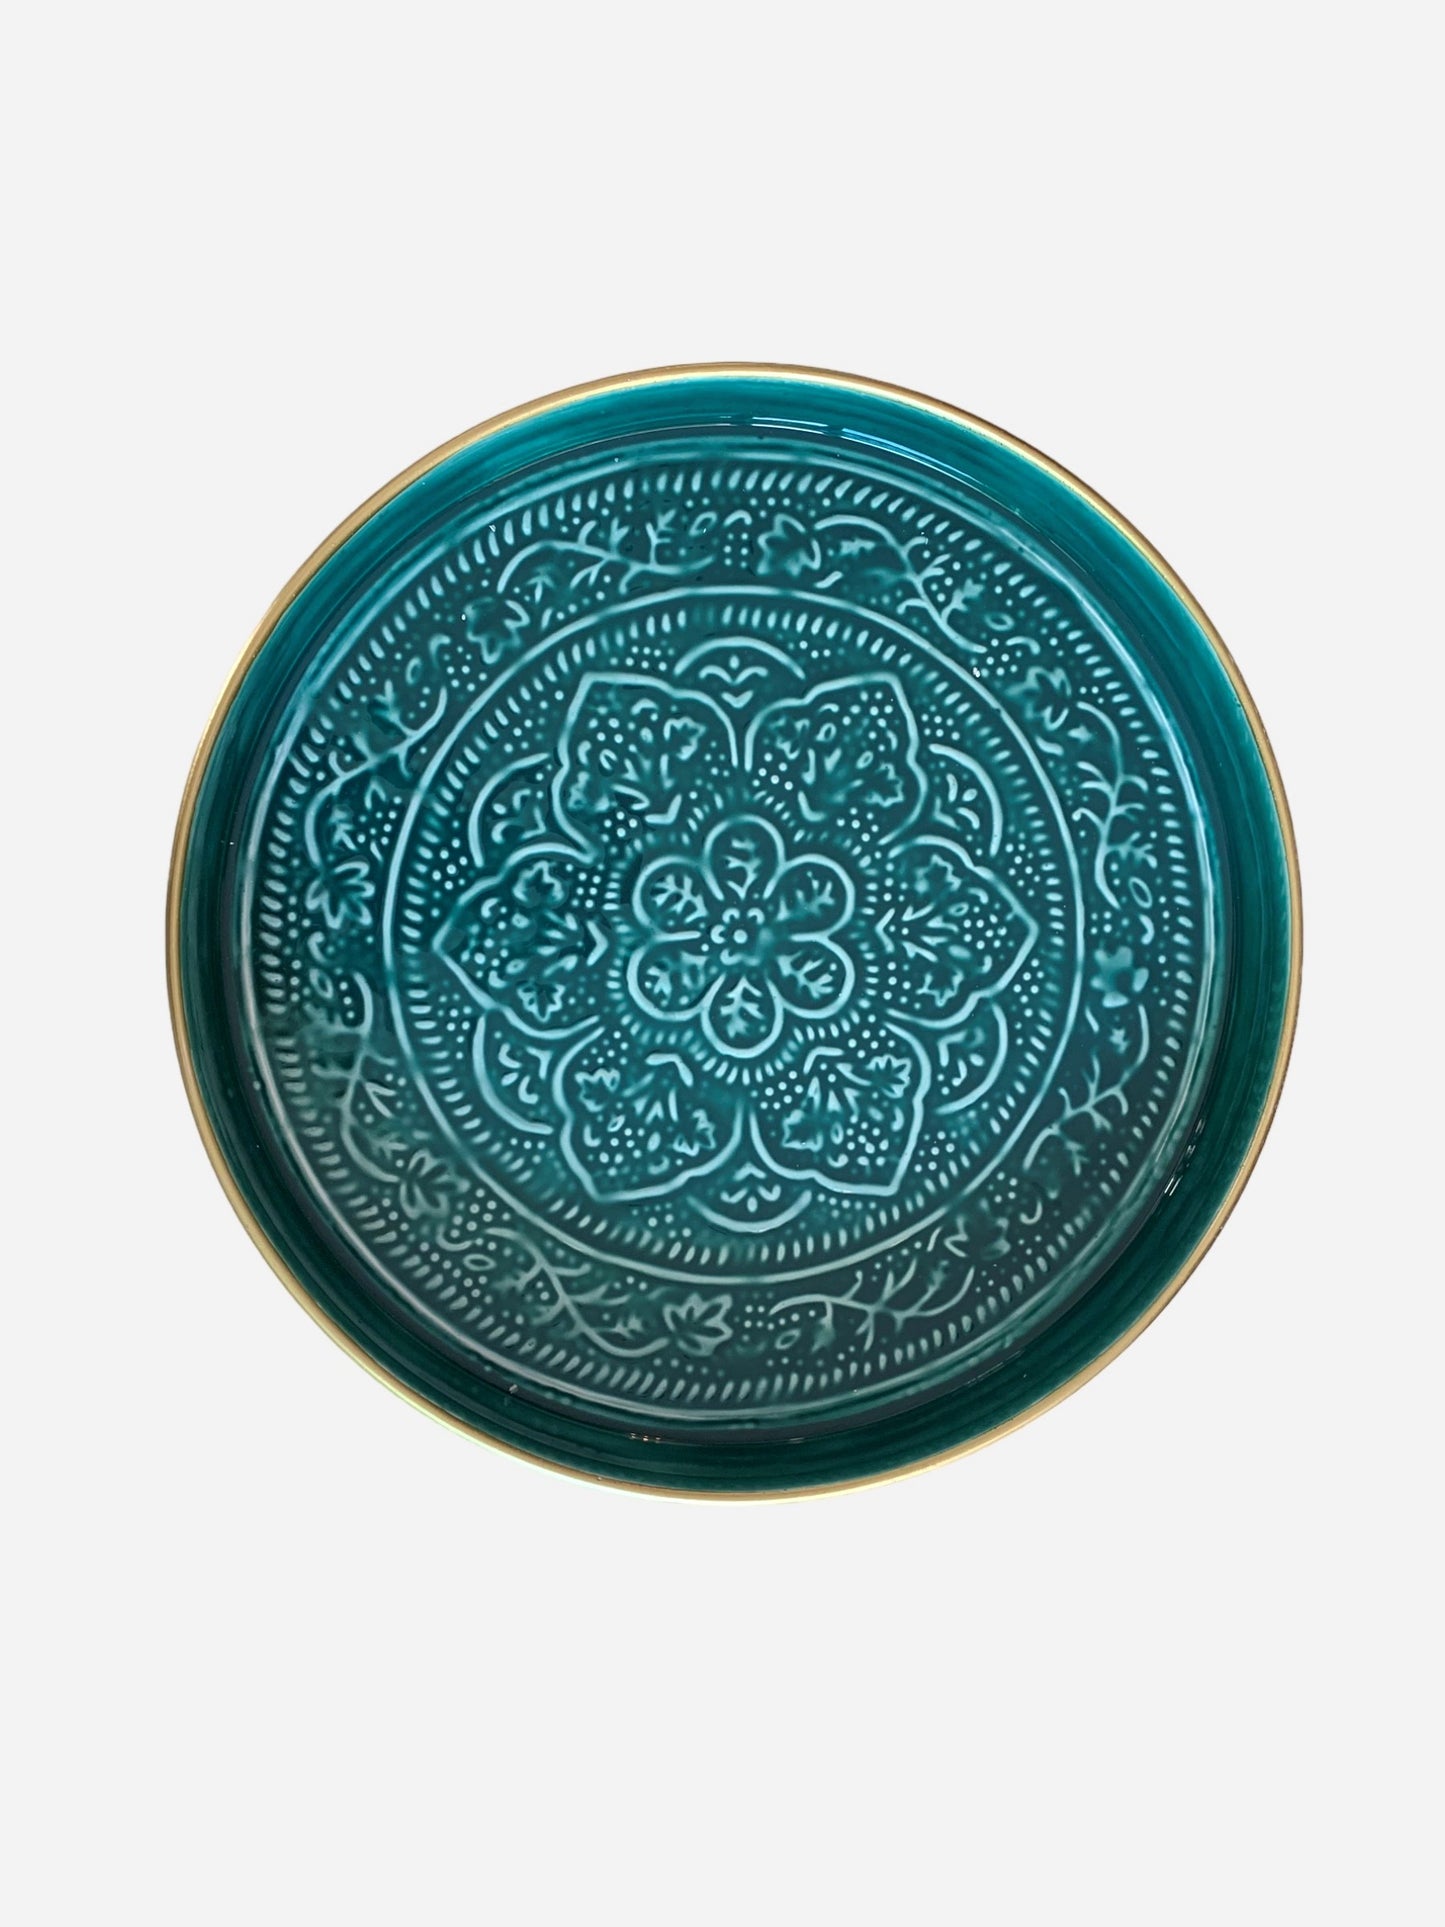 A medium sized teal enamel tray with floral embossing detail.